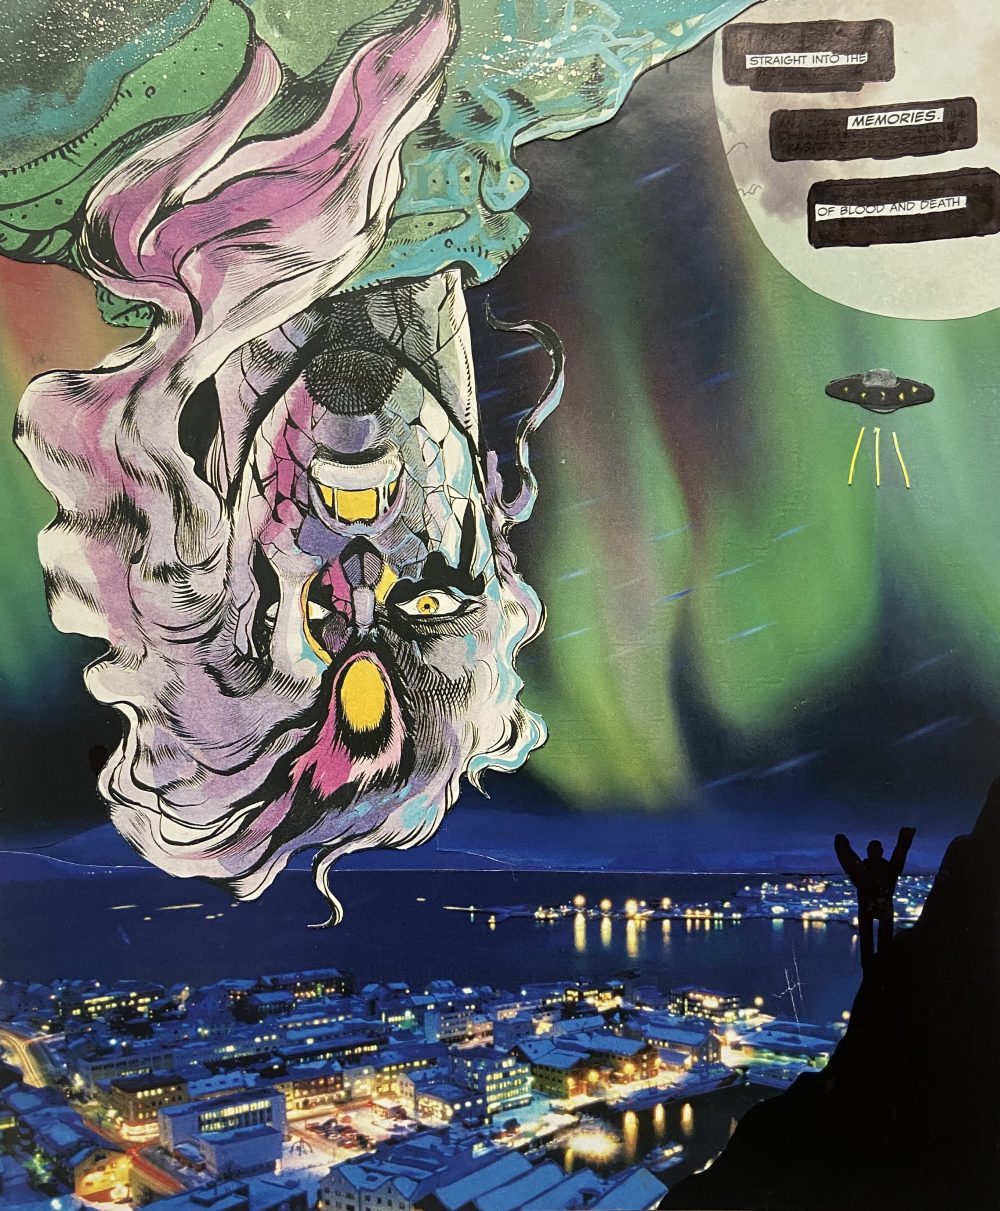 A collage depicting a metallic face, drawn in the style of a comic with long pink hair. In the background lies a city and a person with its hands in the air waving at a UFO.